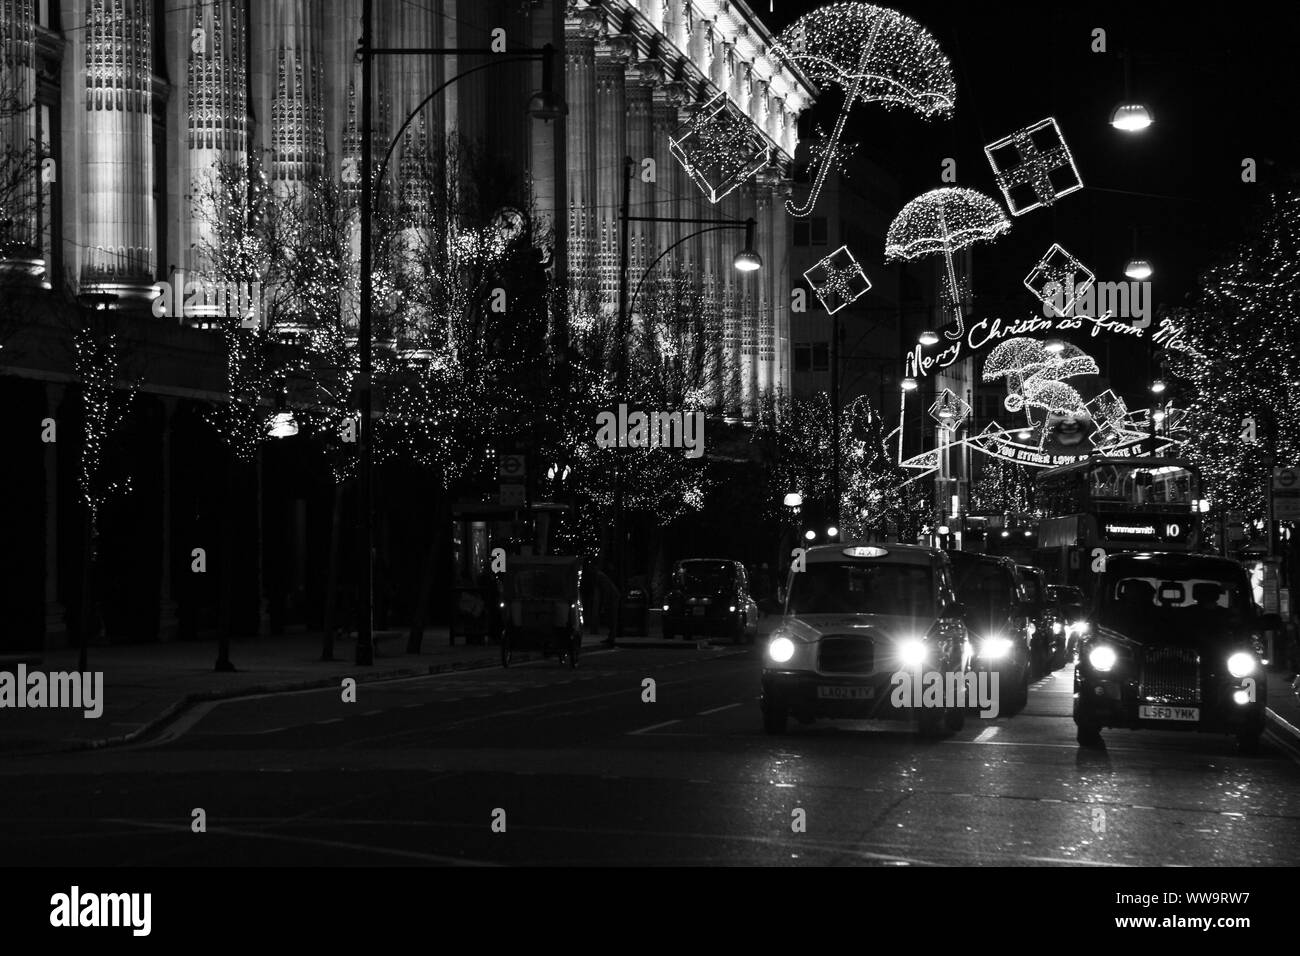 London at night with London black Taxi cabs,  the Oxford street Christmas lights and Selfridges store. Authentic imagery. night scene in London's West end. W1. Postal district. Stock Photo